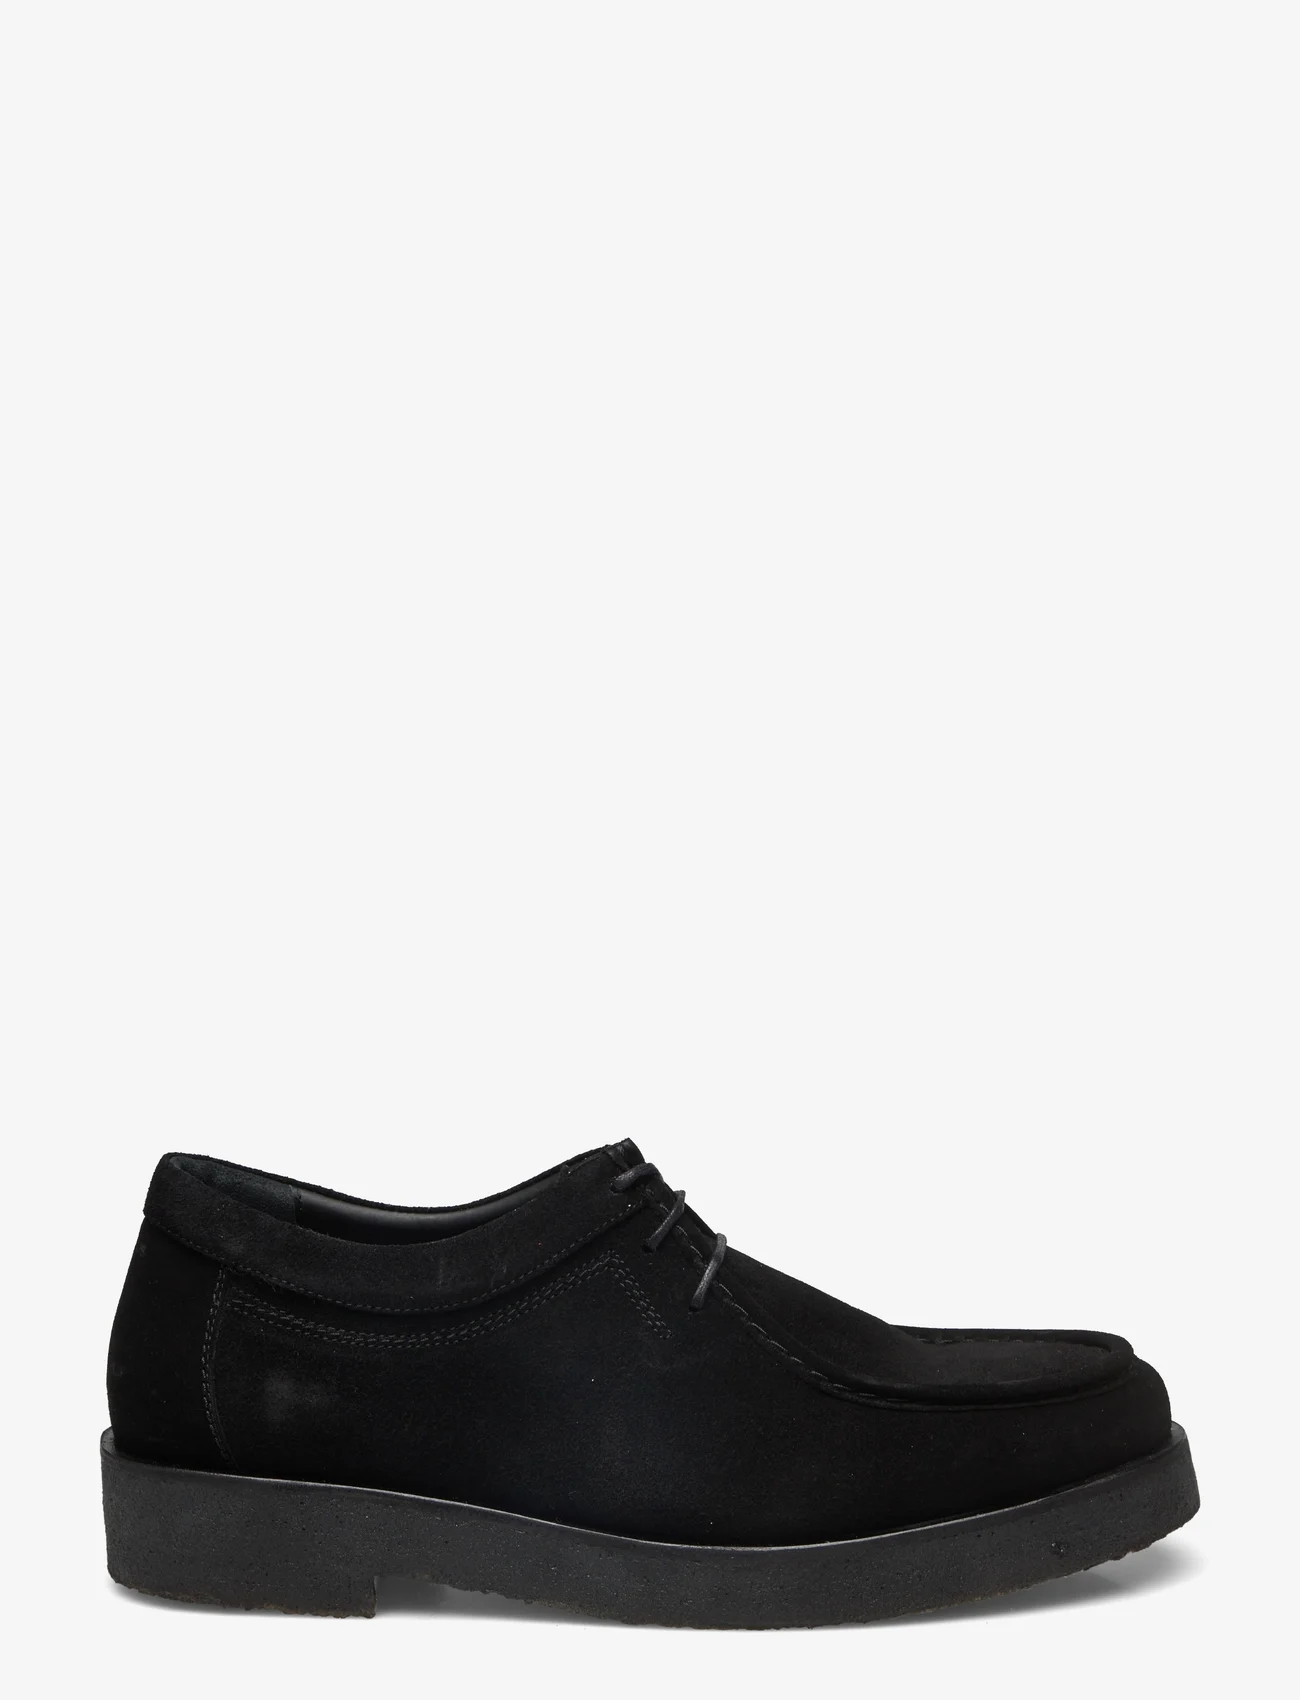 ANGULUS - Shoes - flat - with lace - desert boots - 1163 black - 1